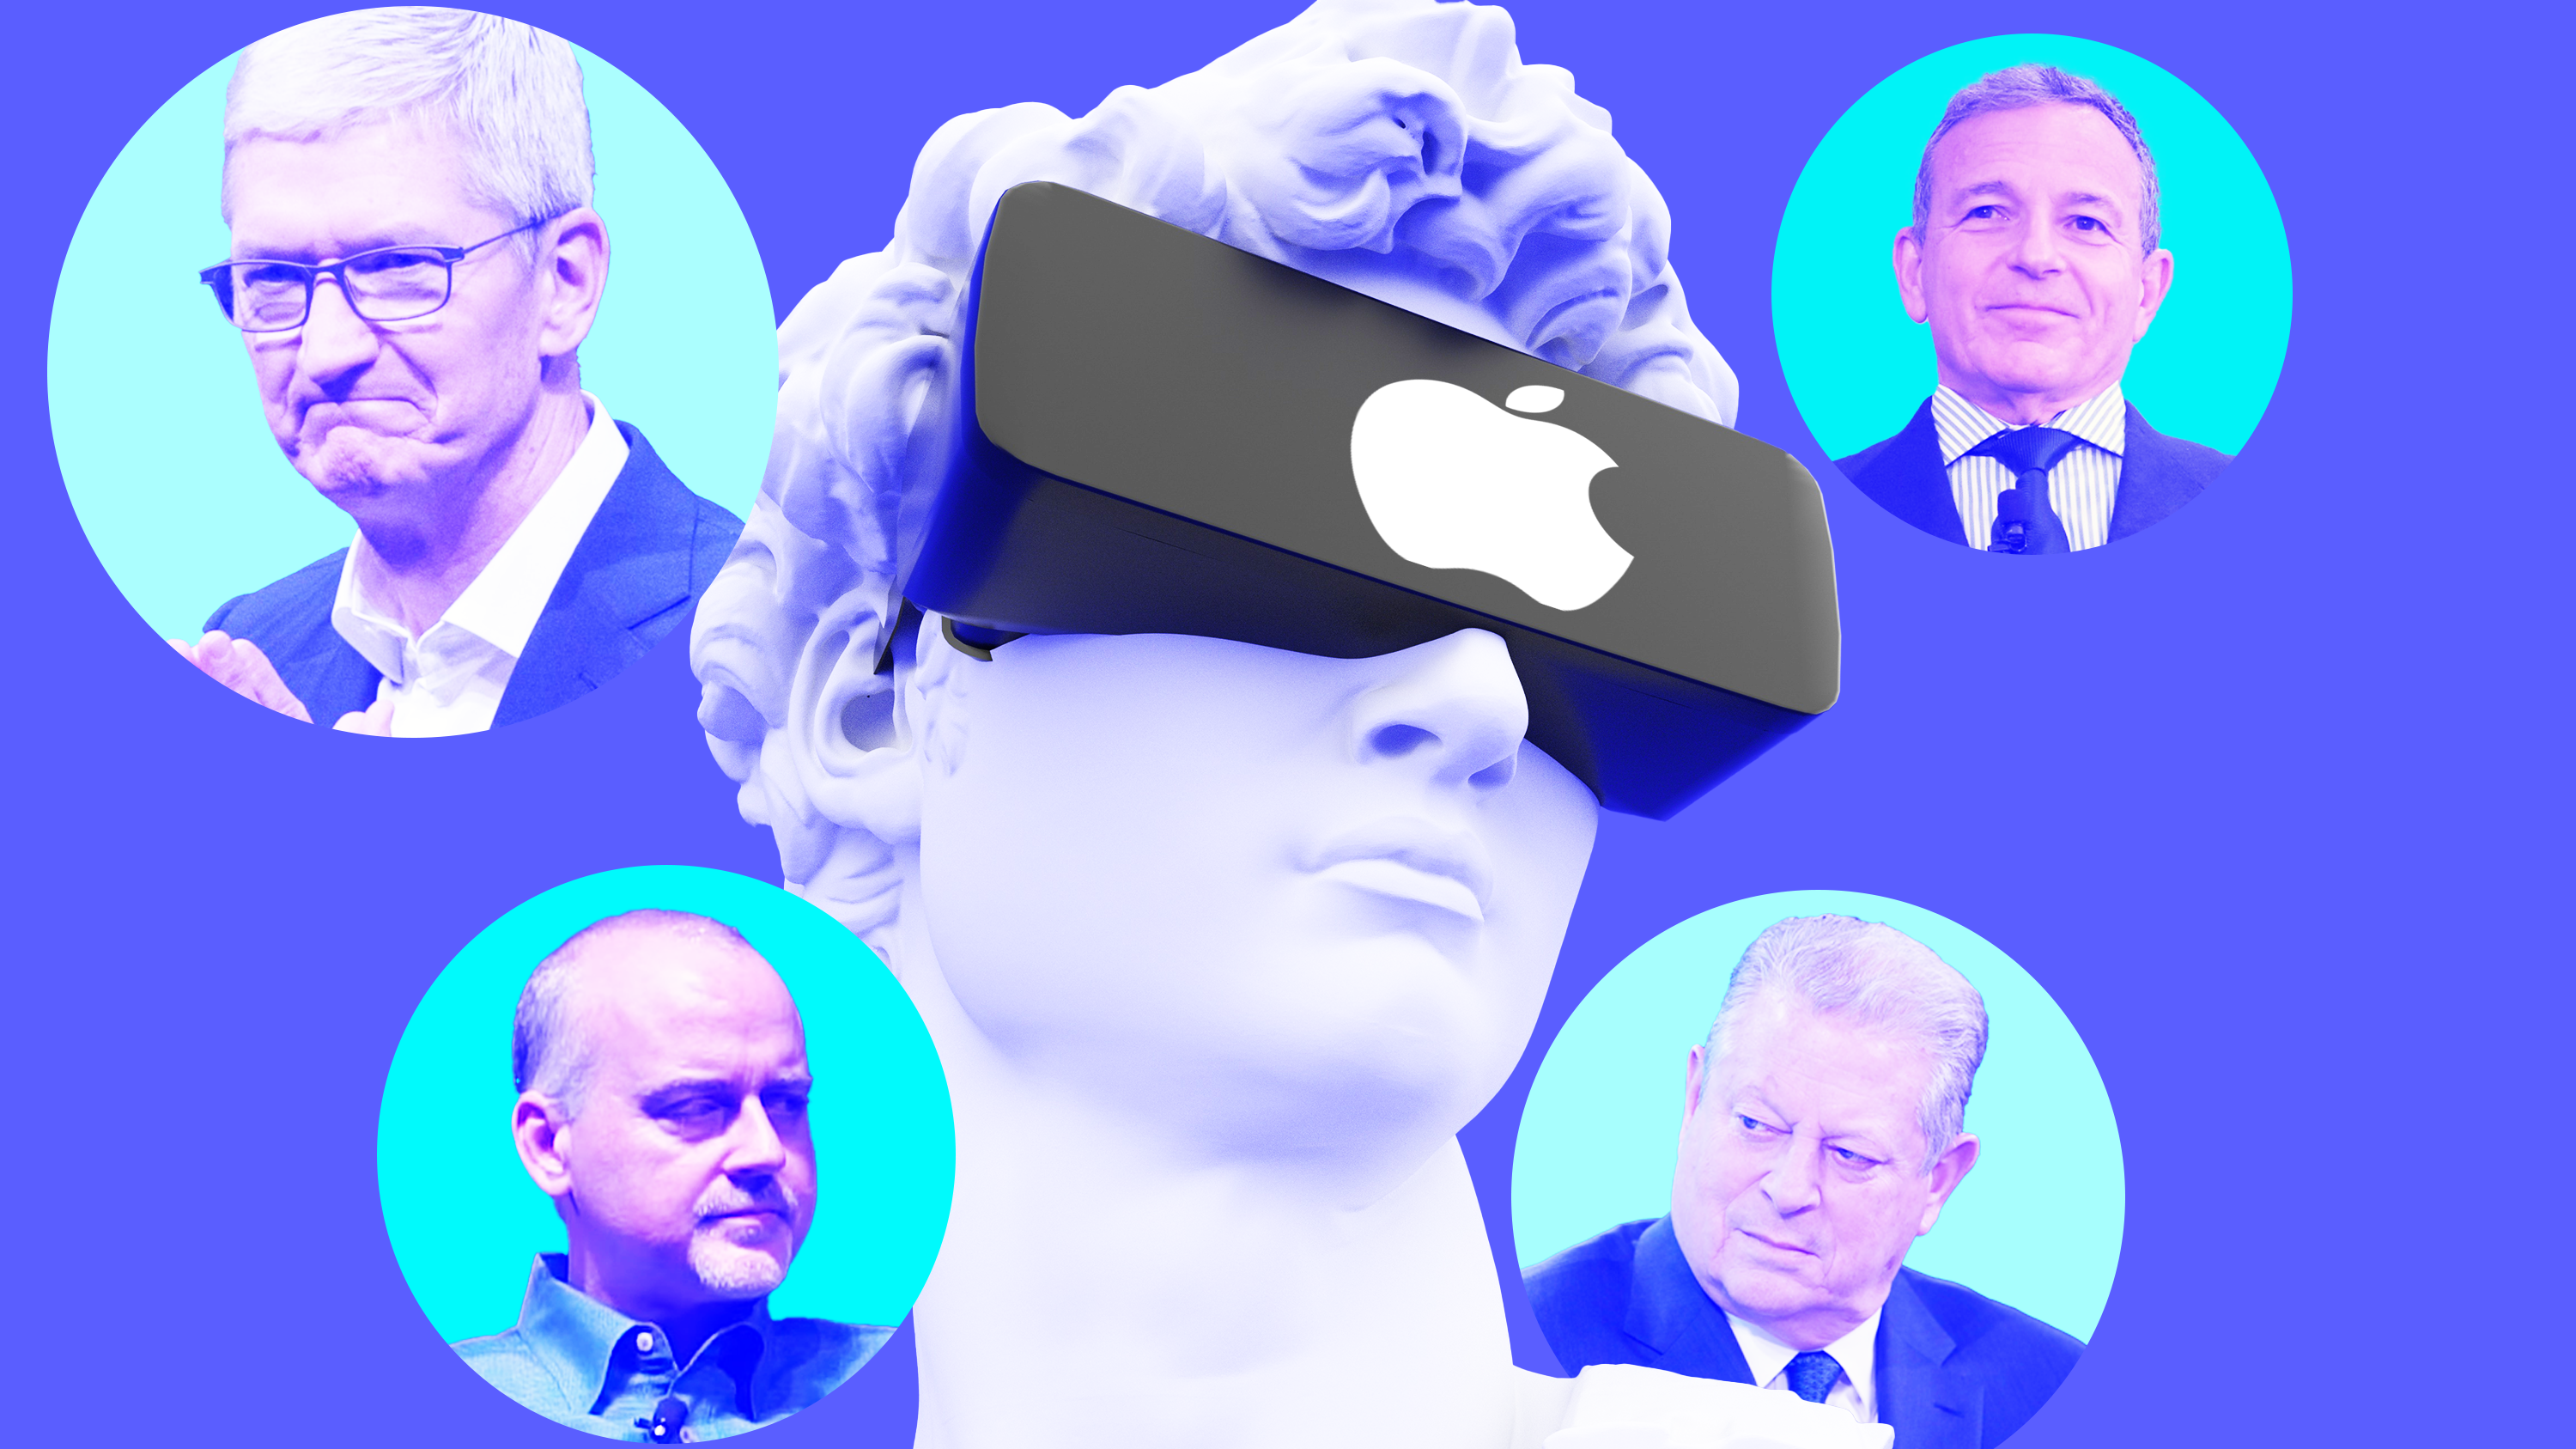 theinformation.com - Wayne Ma - The Inside Story of Why Apple Bet Big on a Mixed-Reality Headset